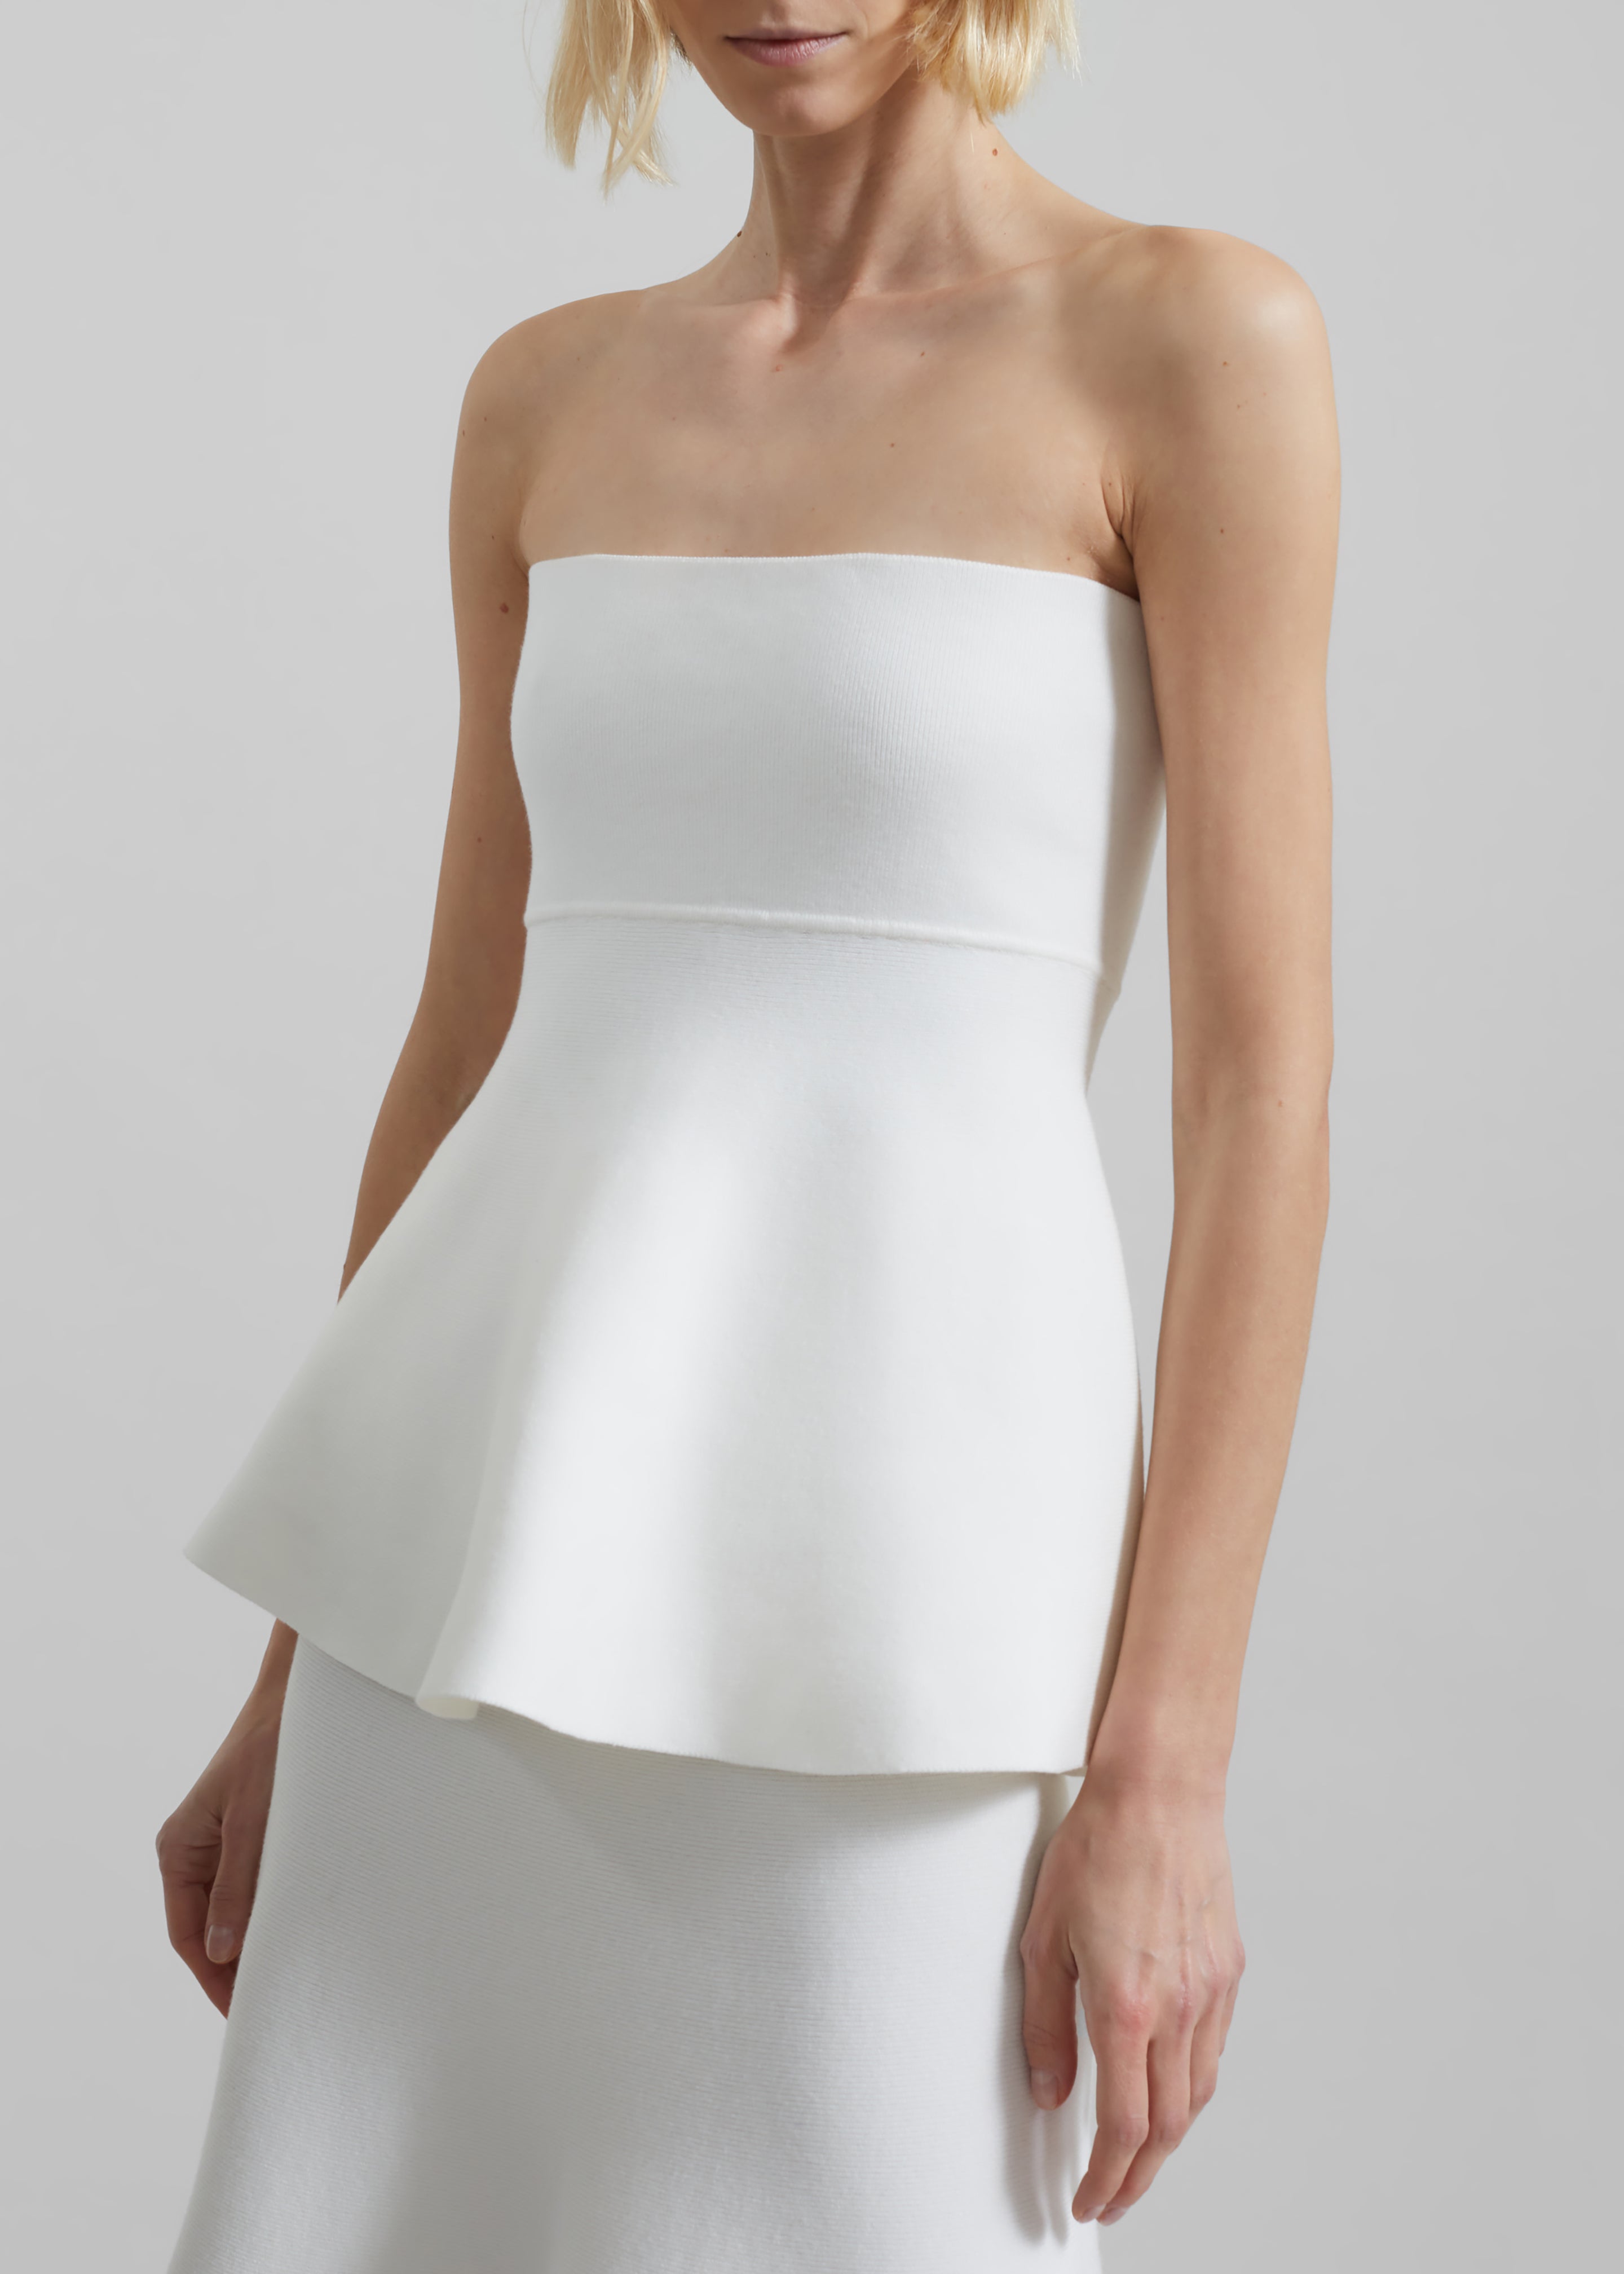 Agathe Knit Bustier - Off White - 5